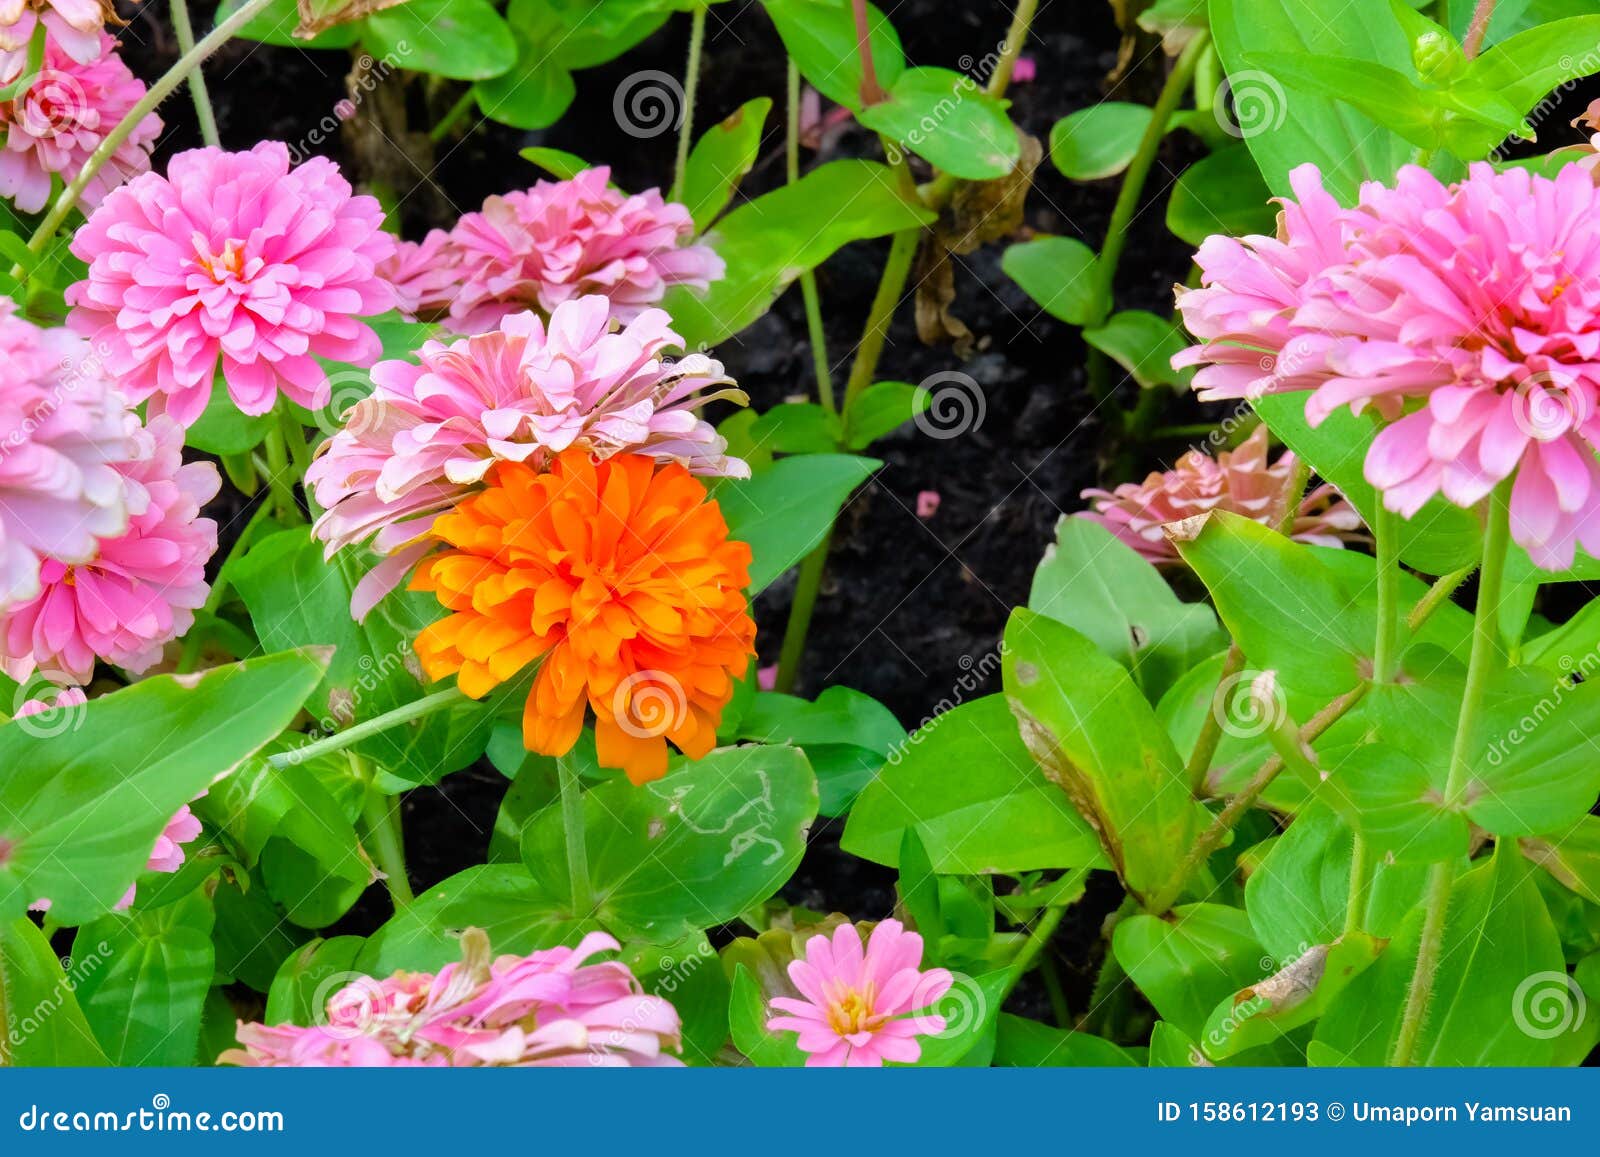 Flowers Zinnia Elegans Common Zinnia Flower Background Is A Single Leaf Herbaceous Plant With A Bouquet Of Red Pink Orange Stock Image Image Of Leaf Botanical 158612193